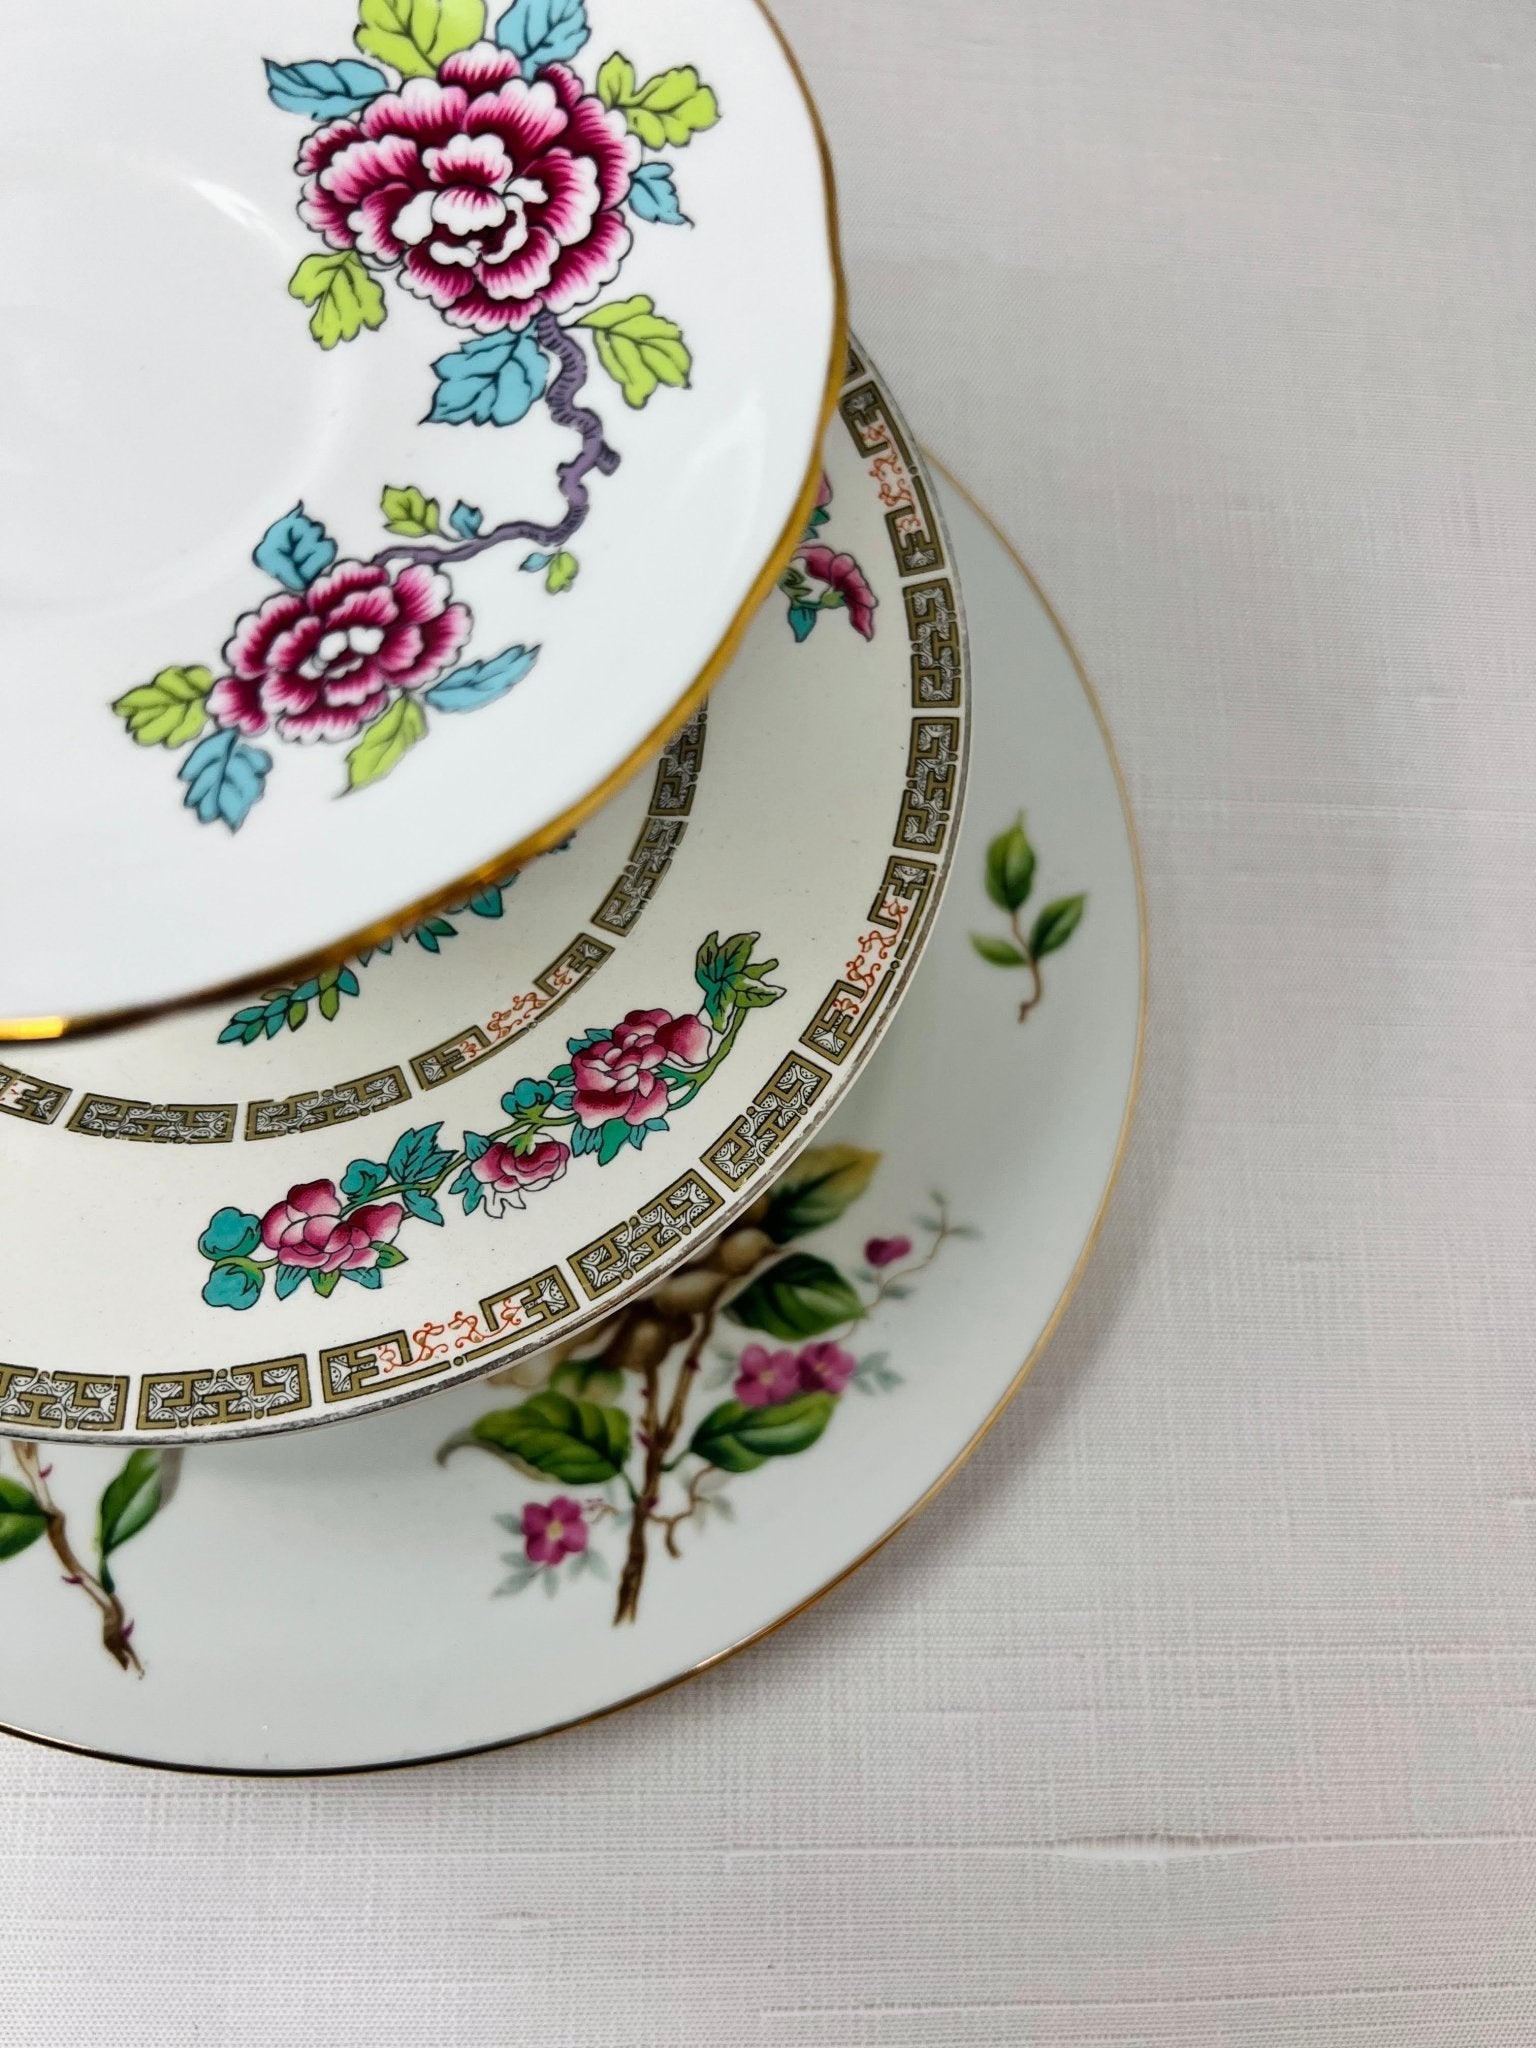 Tray of the Day - Monday | The Brooklyn Teacup - The Brooklyn Teacup